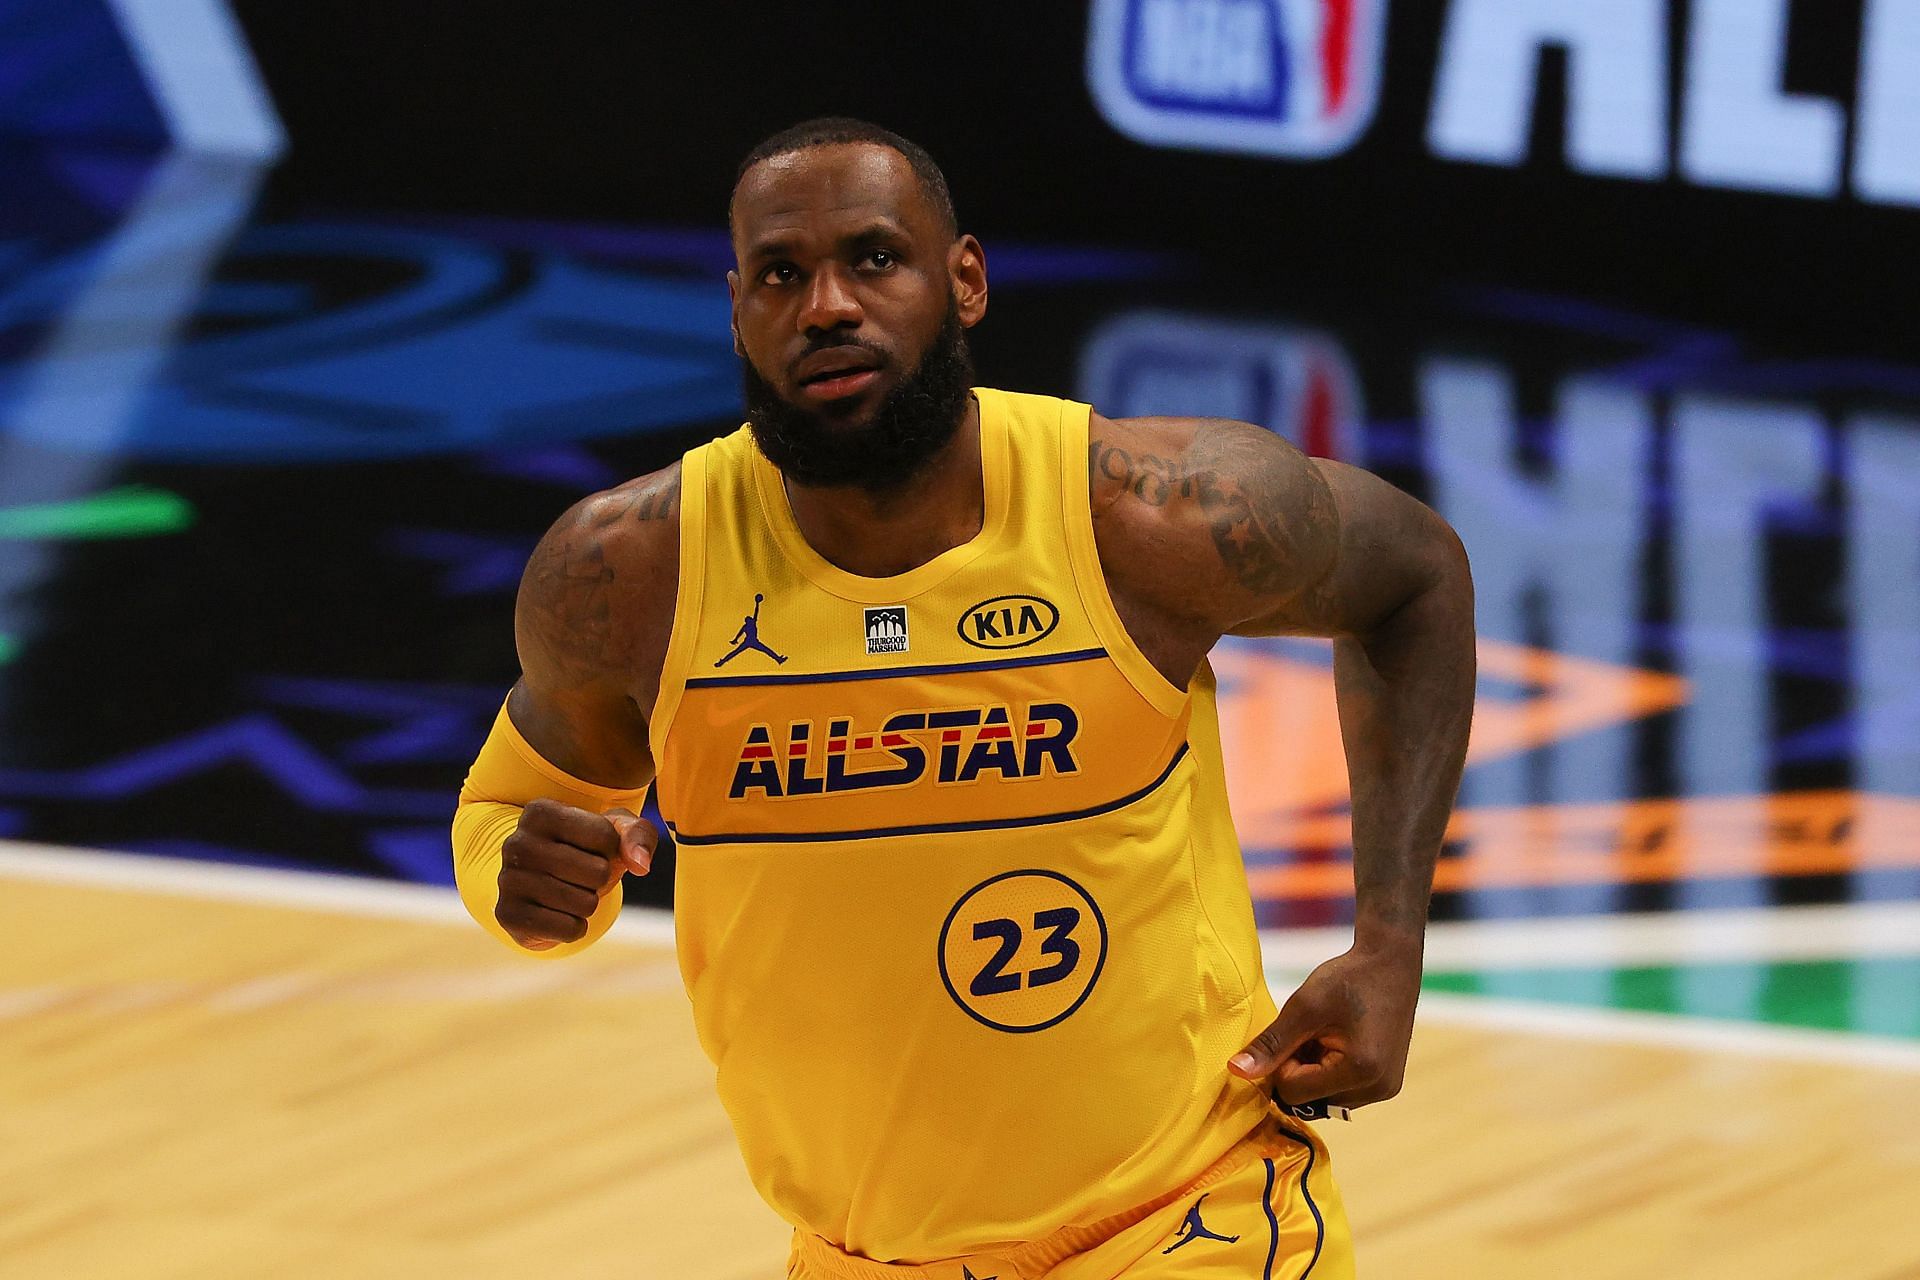 LeBron James at the 2021 NBA All-Star Game